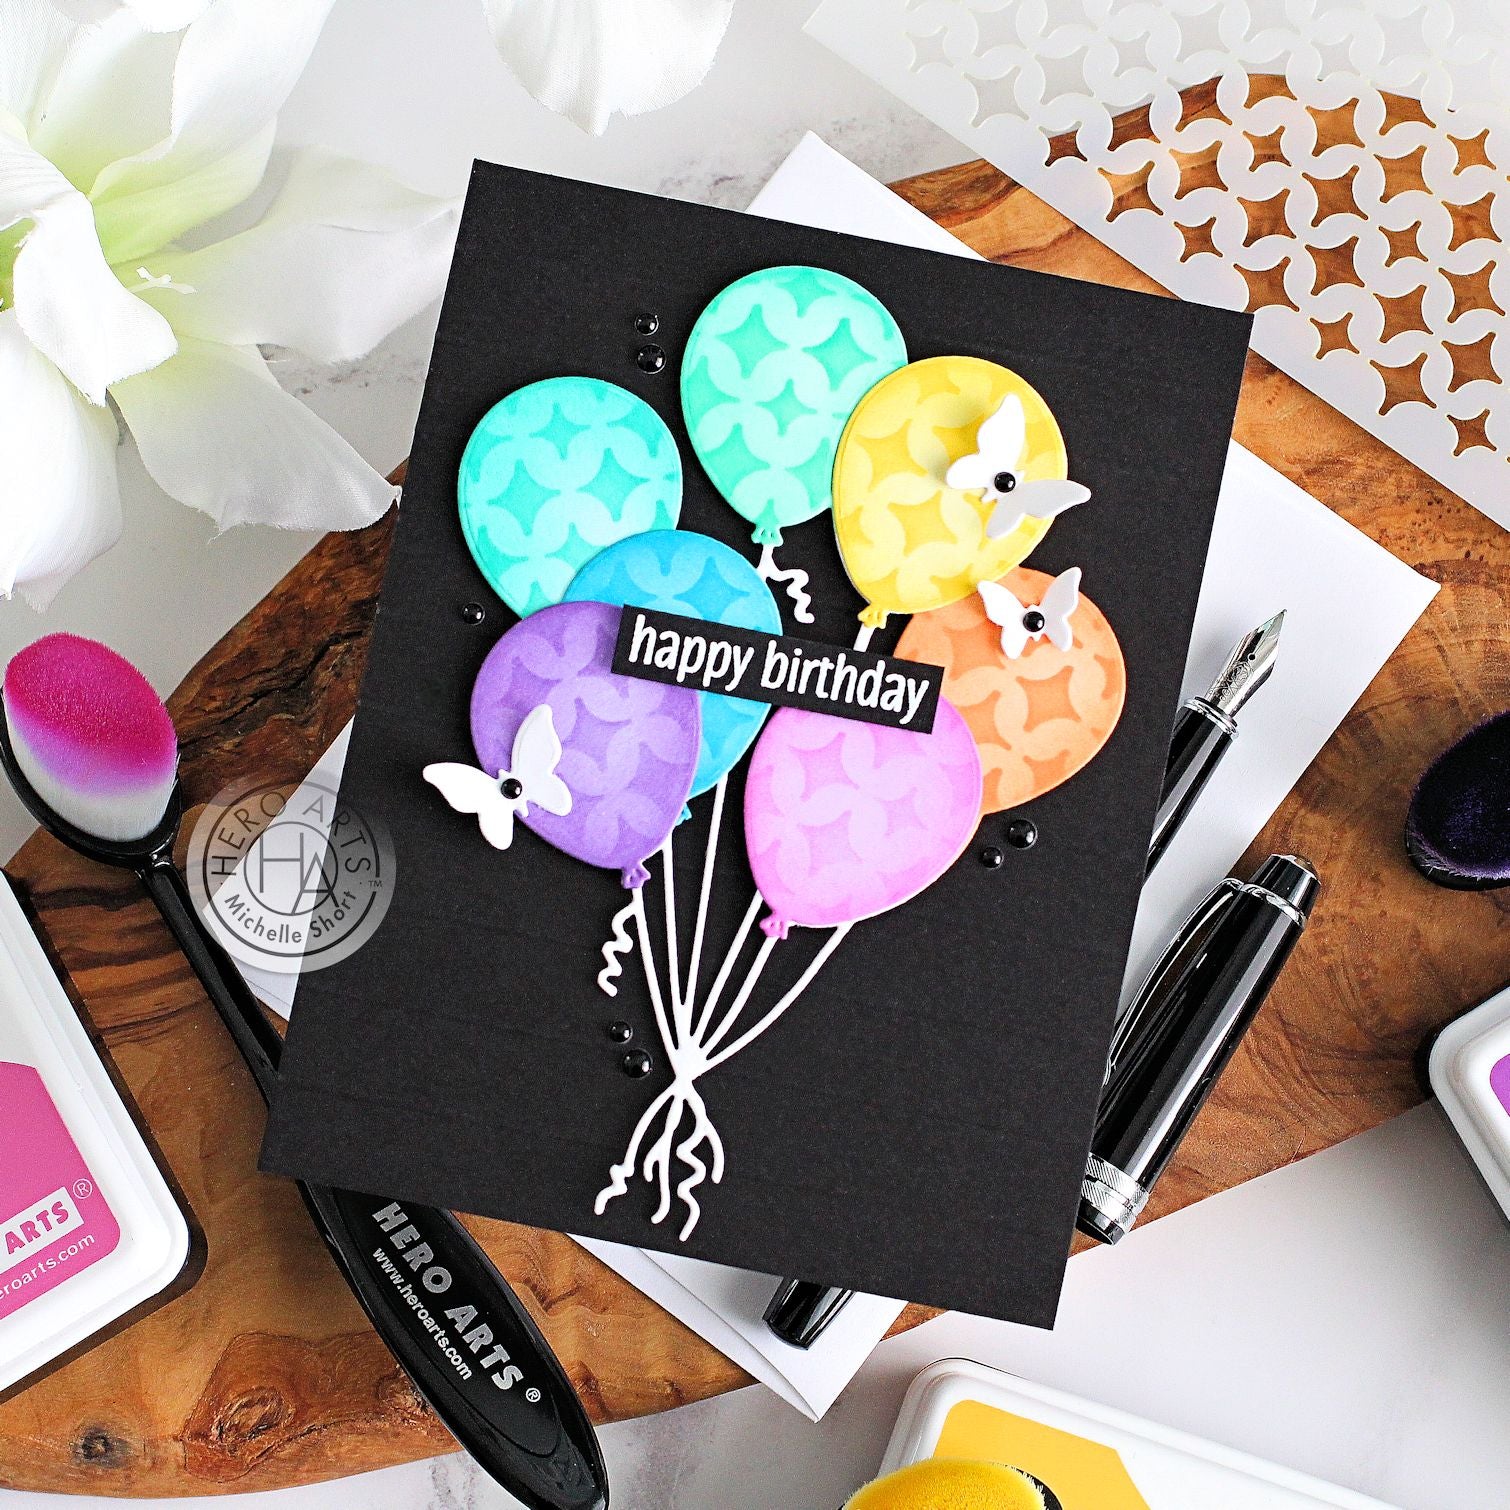 Balloon Bunch by Michelle Short for Hero Arts